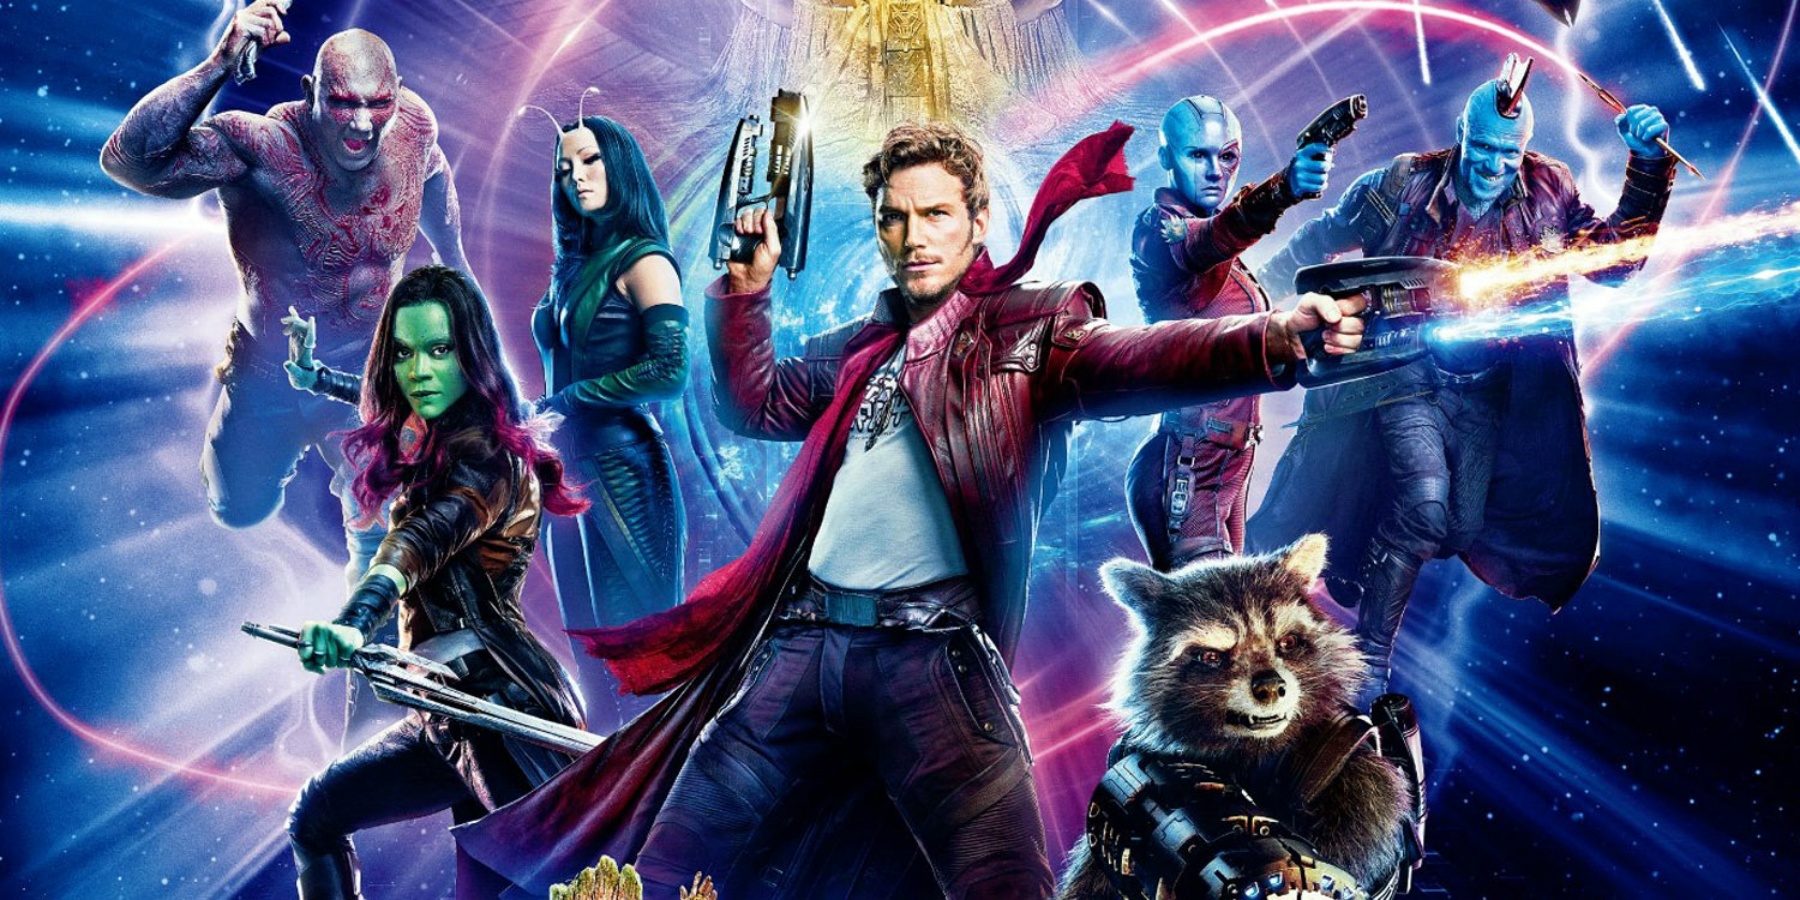 Guardians of the Galaxy Vol. 2 Passes $800 Million At Worldwide Box Office